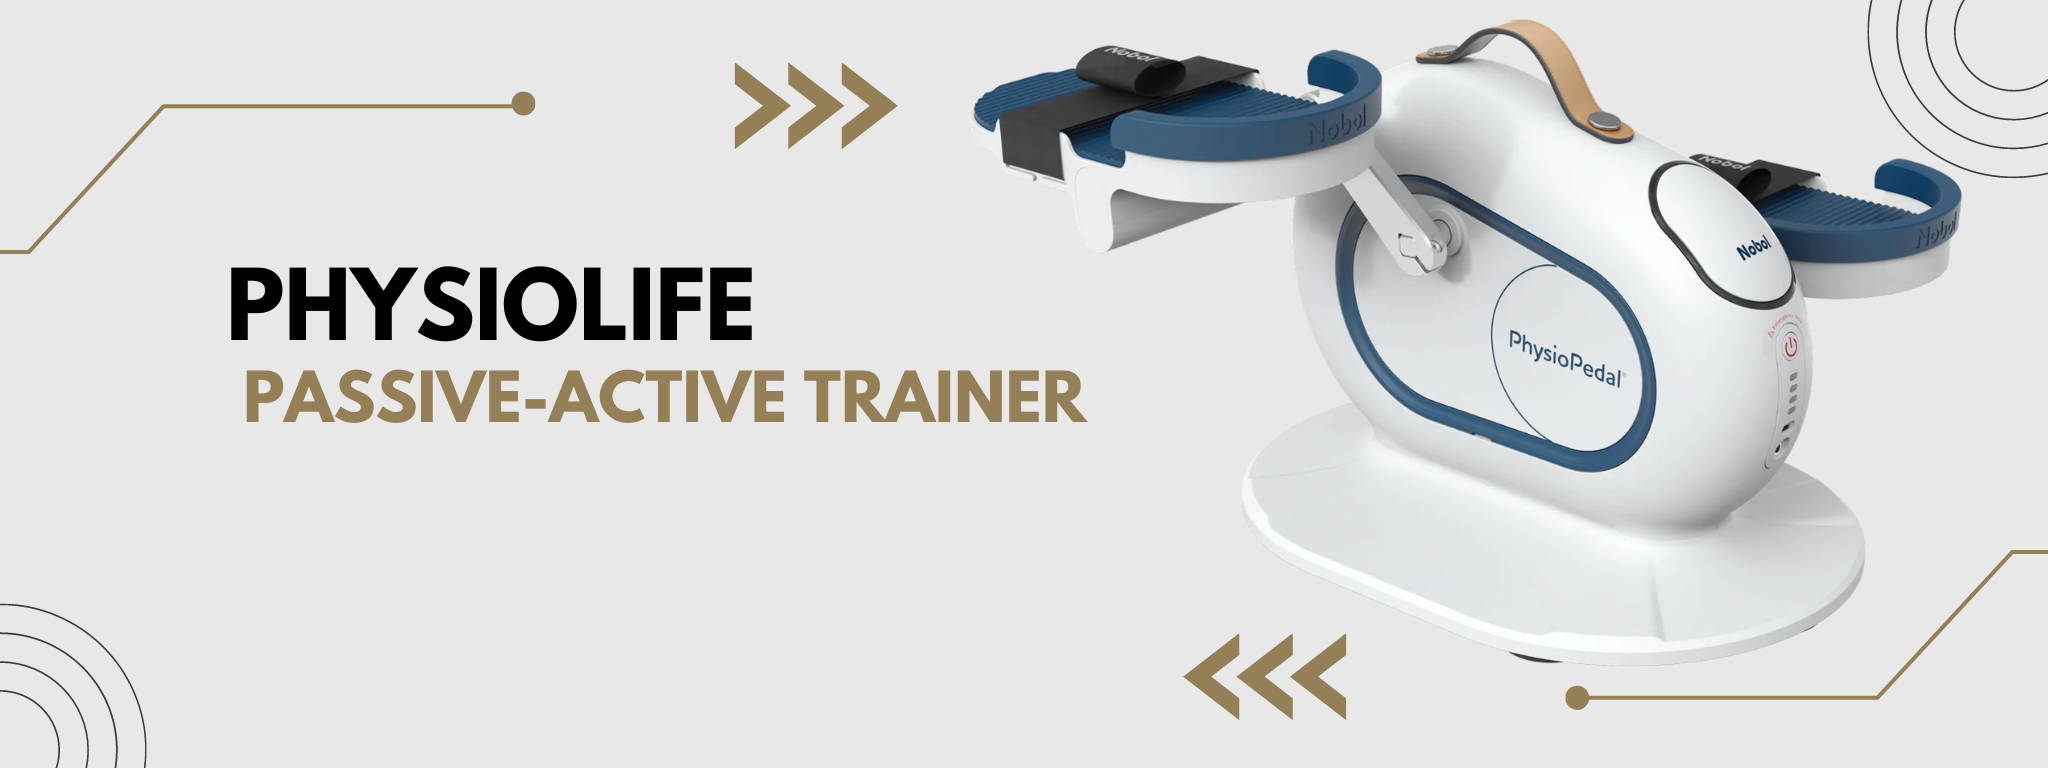 PhysioLife    passive-active trainer 